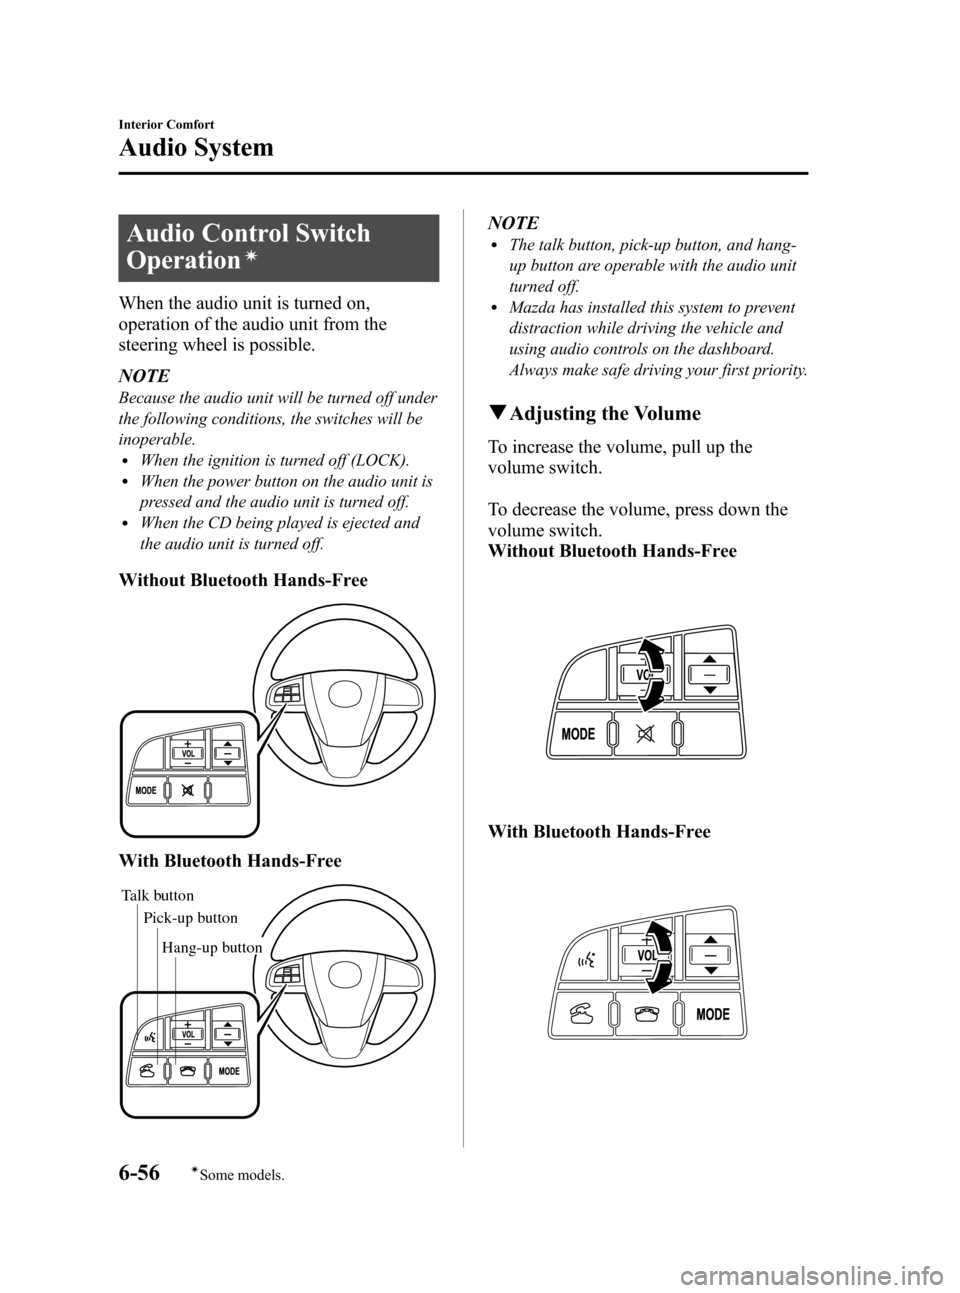 MAZDA MODEL 3 HATCHBACK 2010  Owners Manual (in English) Black plate (280,1)
Audio Control Switch
Operation
í
When the audio unit is turned on,
operation of the audio unit from the
steering wheel is possible.
NOTE
Because the audio unit will be turned off 